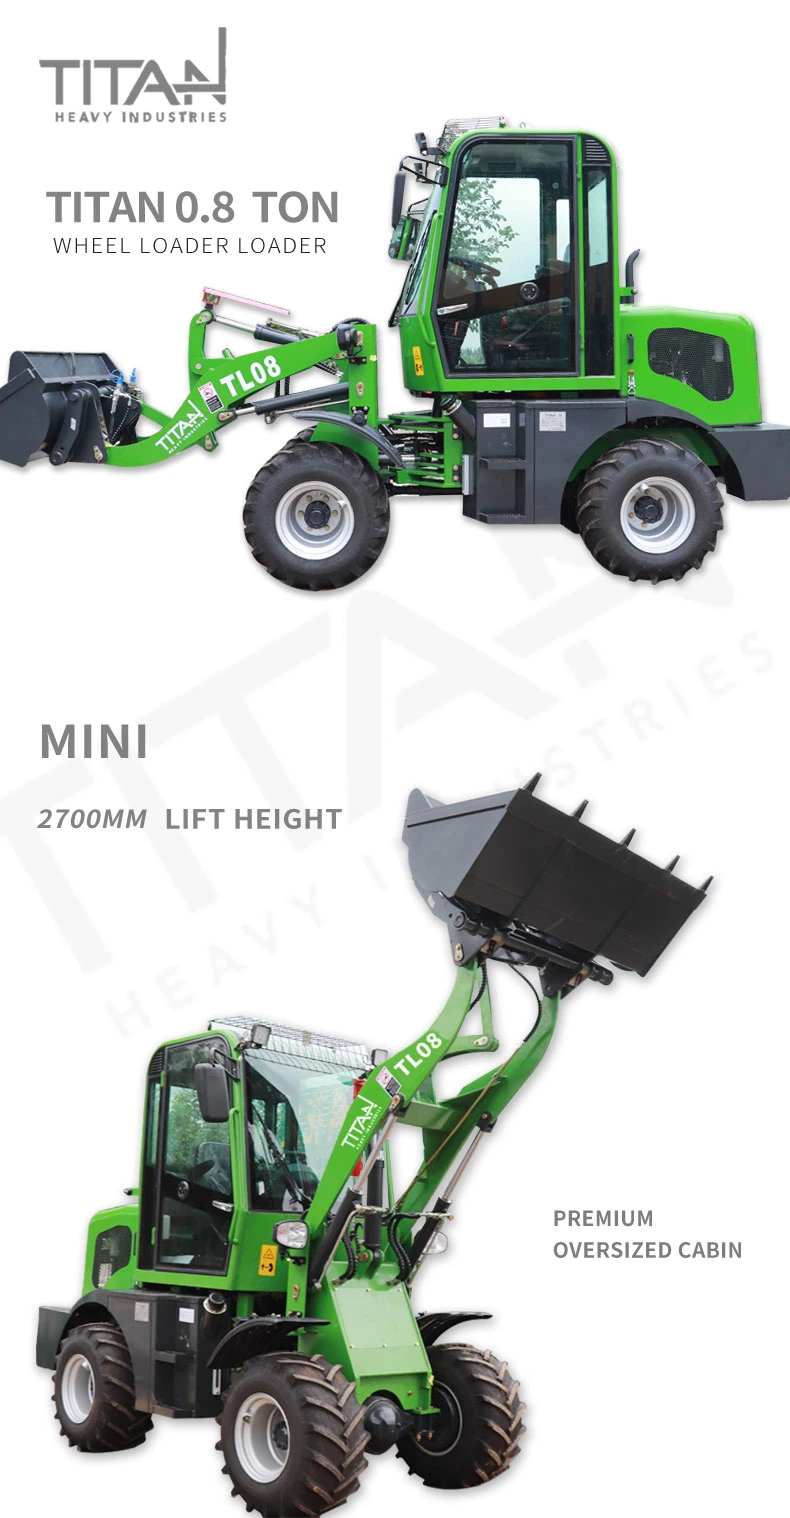 Factory Titan 800kg Cheap Micro New Shovel Payloader China Agriculture Articulated Small Compact Farm Garden Front End mini wheel Loader with CE/ISO EURO5/EPA4